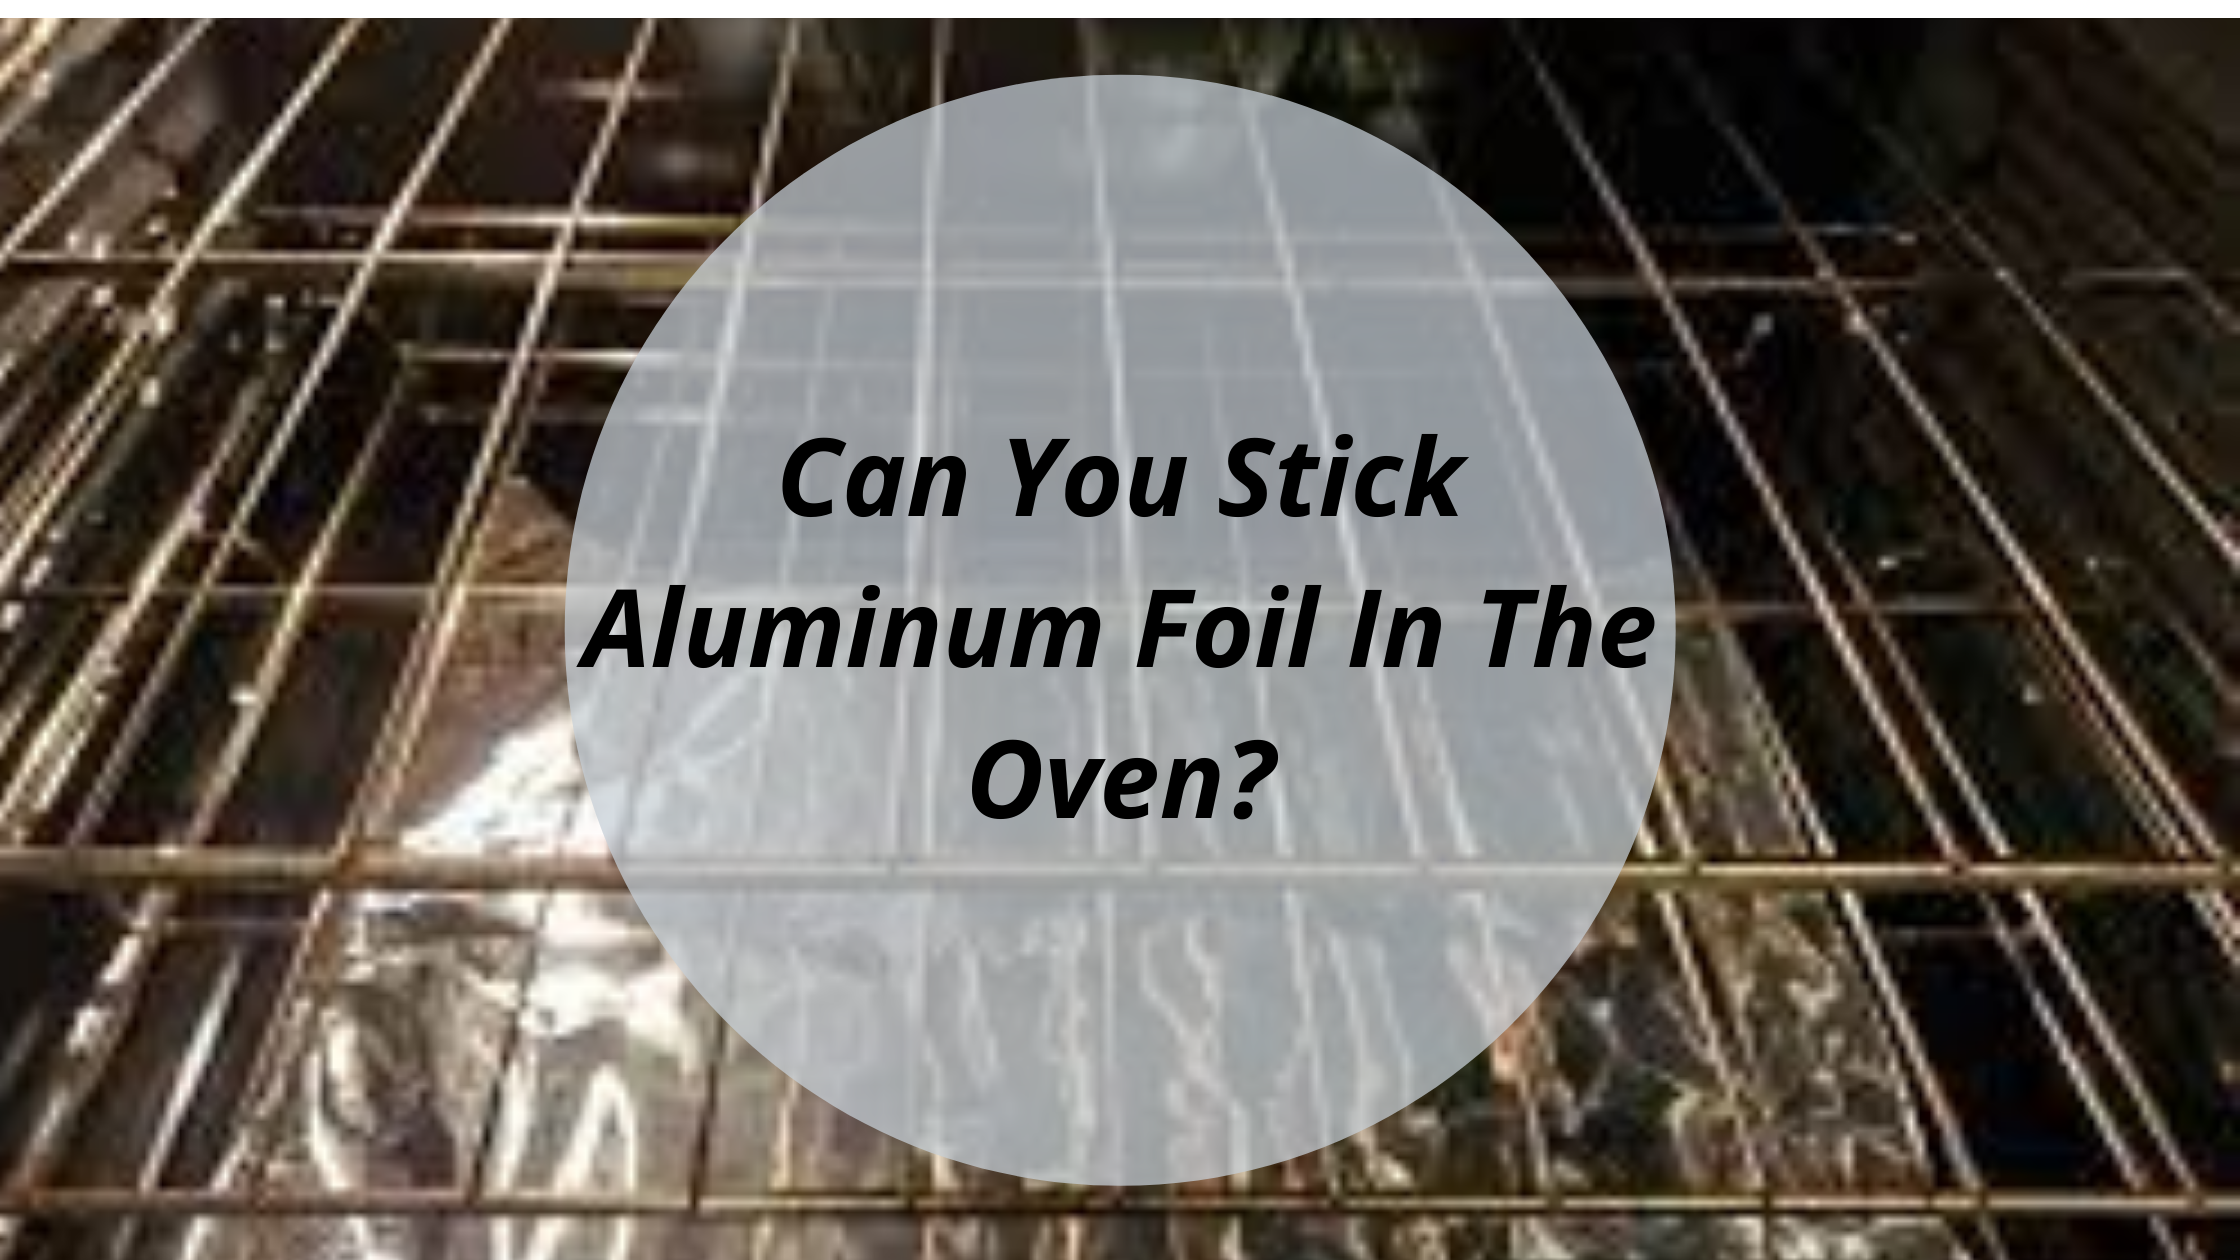 Can You Stick Aluminum Foil In The Oven?